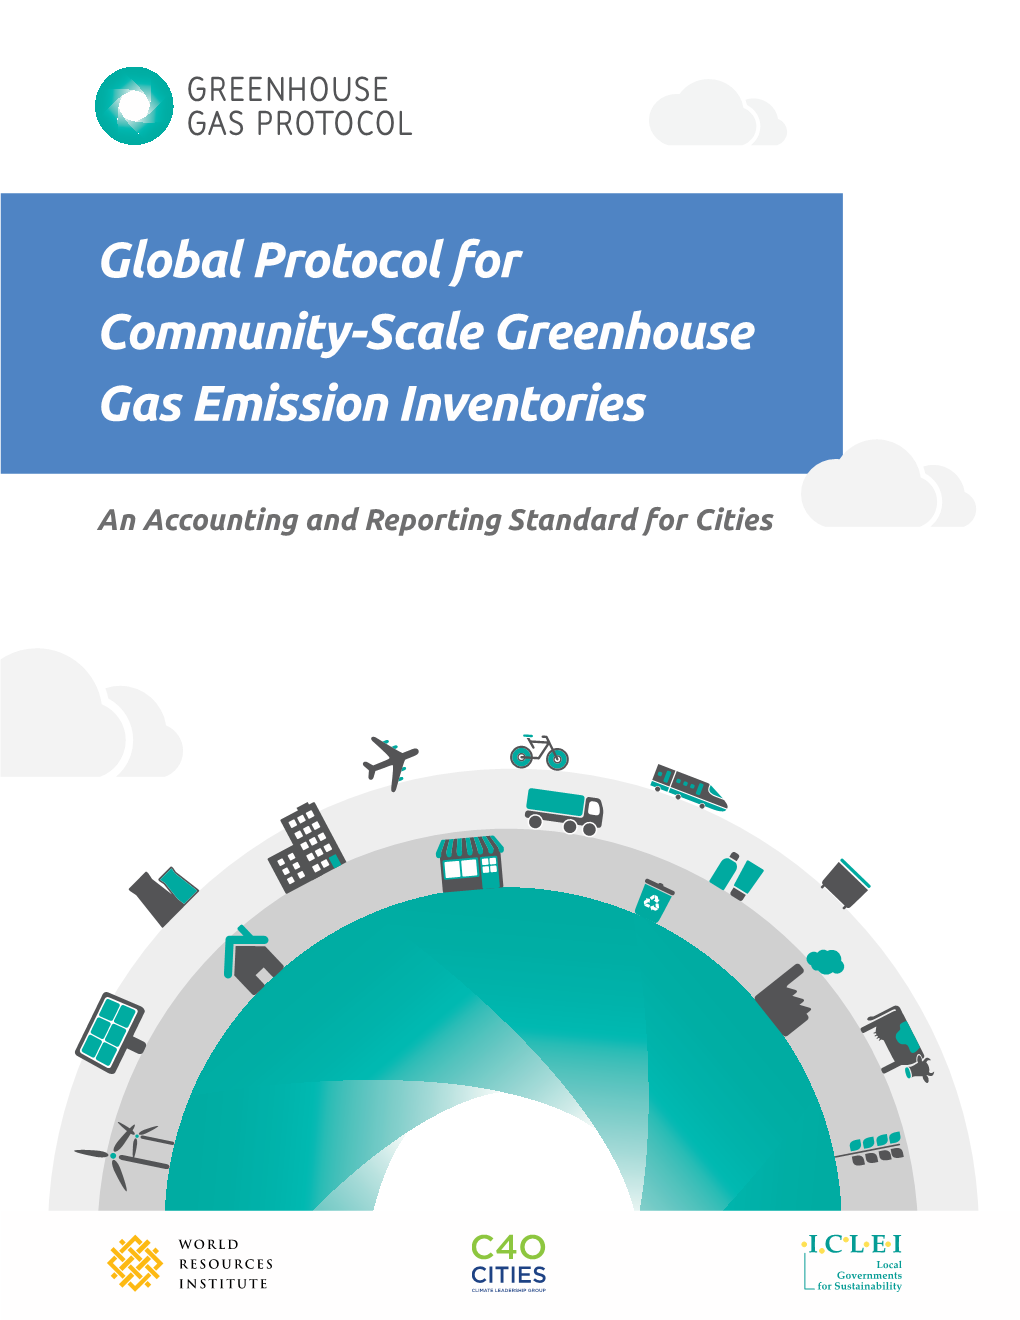 Global Protocol for Community-Scale Greenhouse Gas Emission Inventories